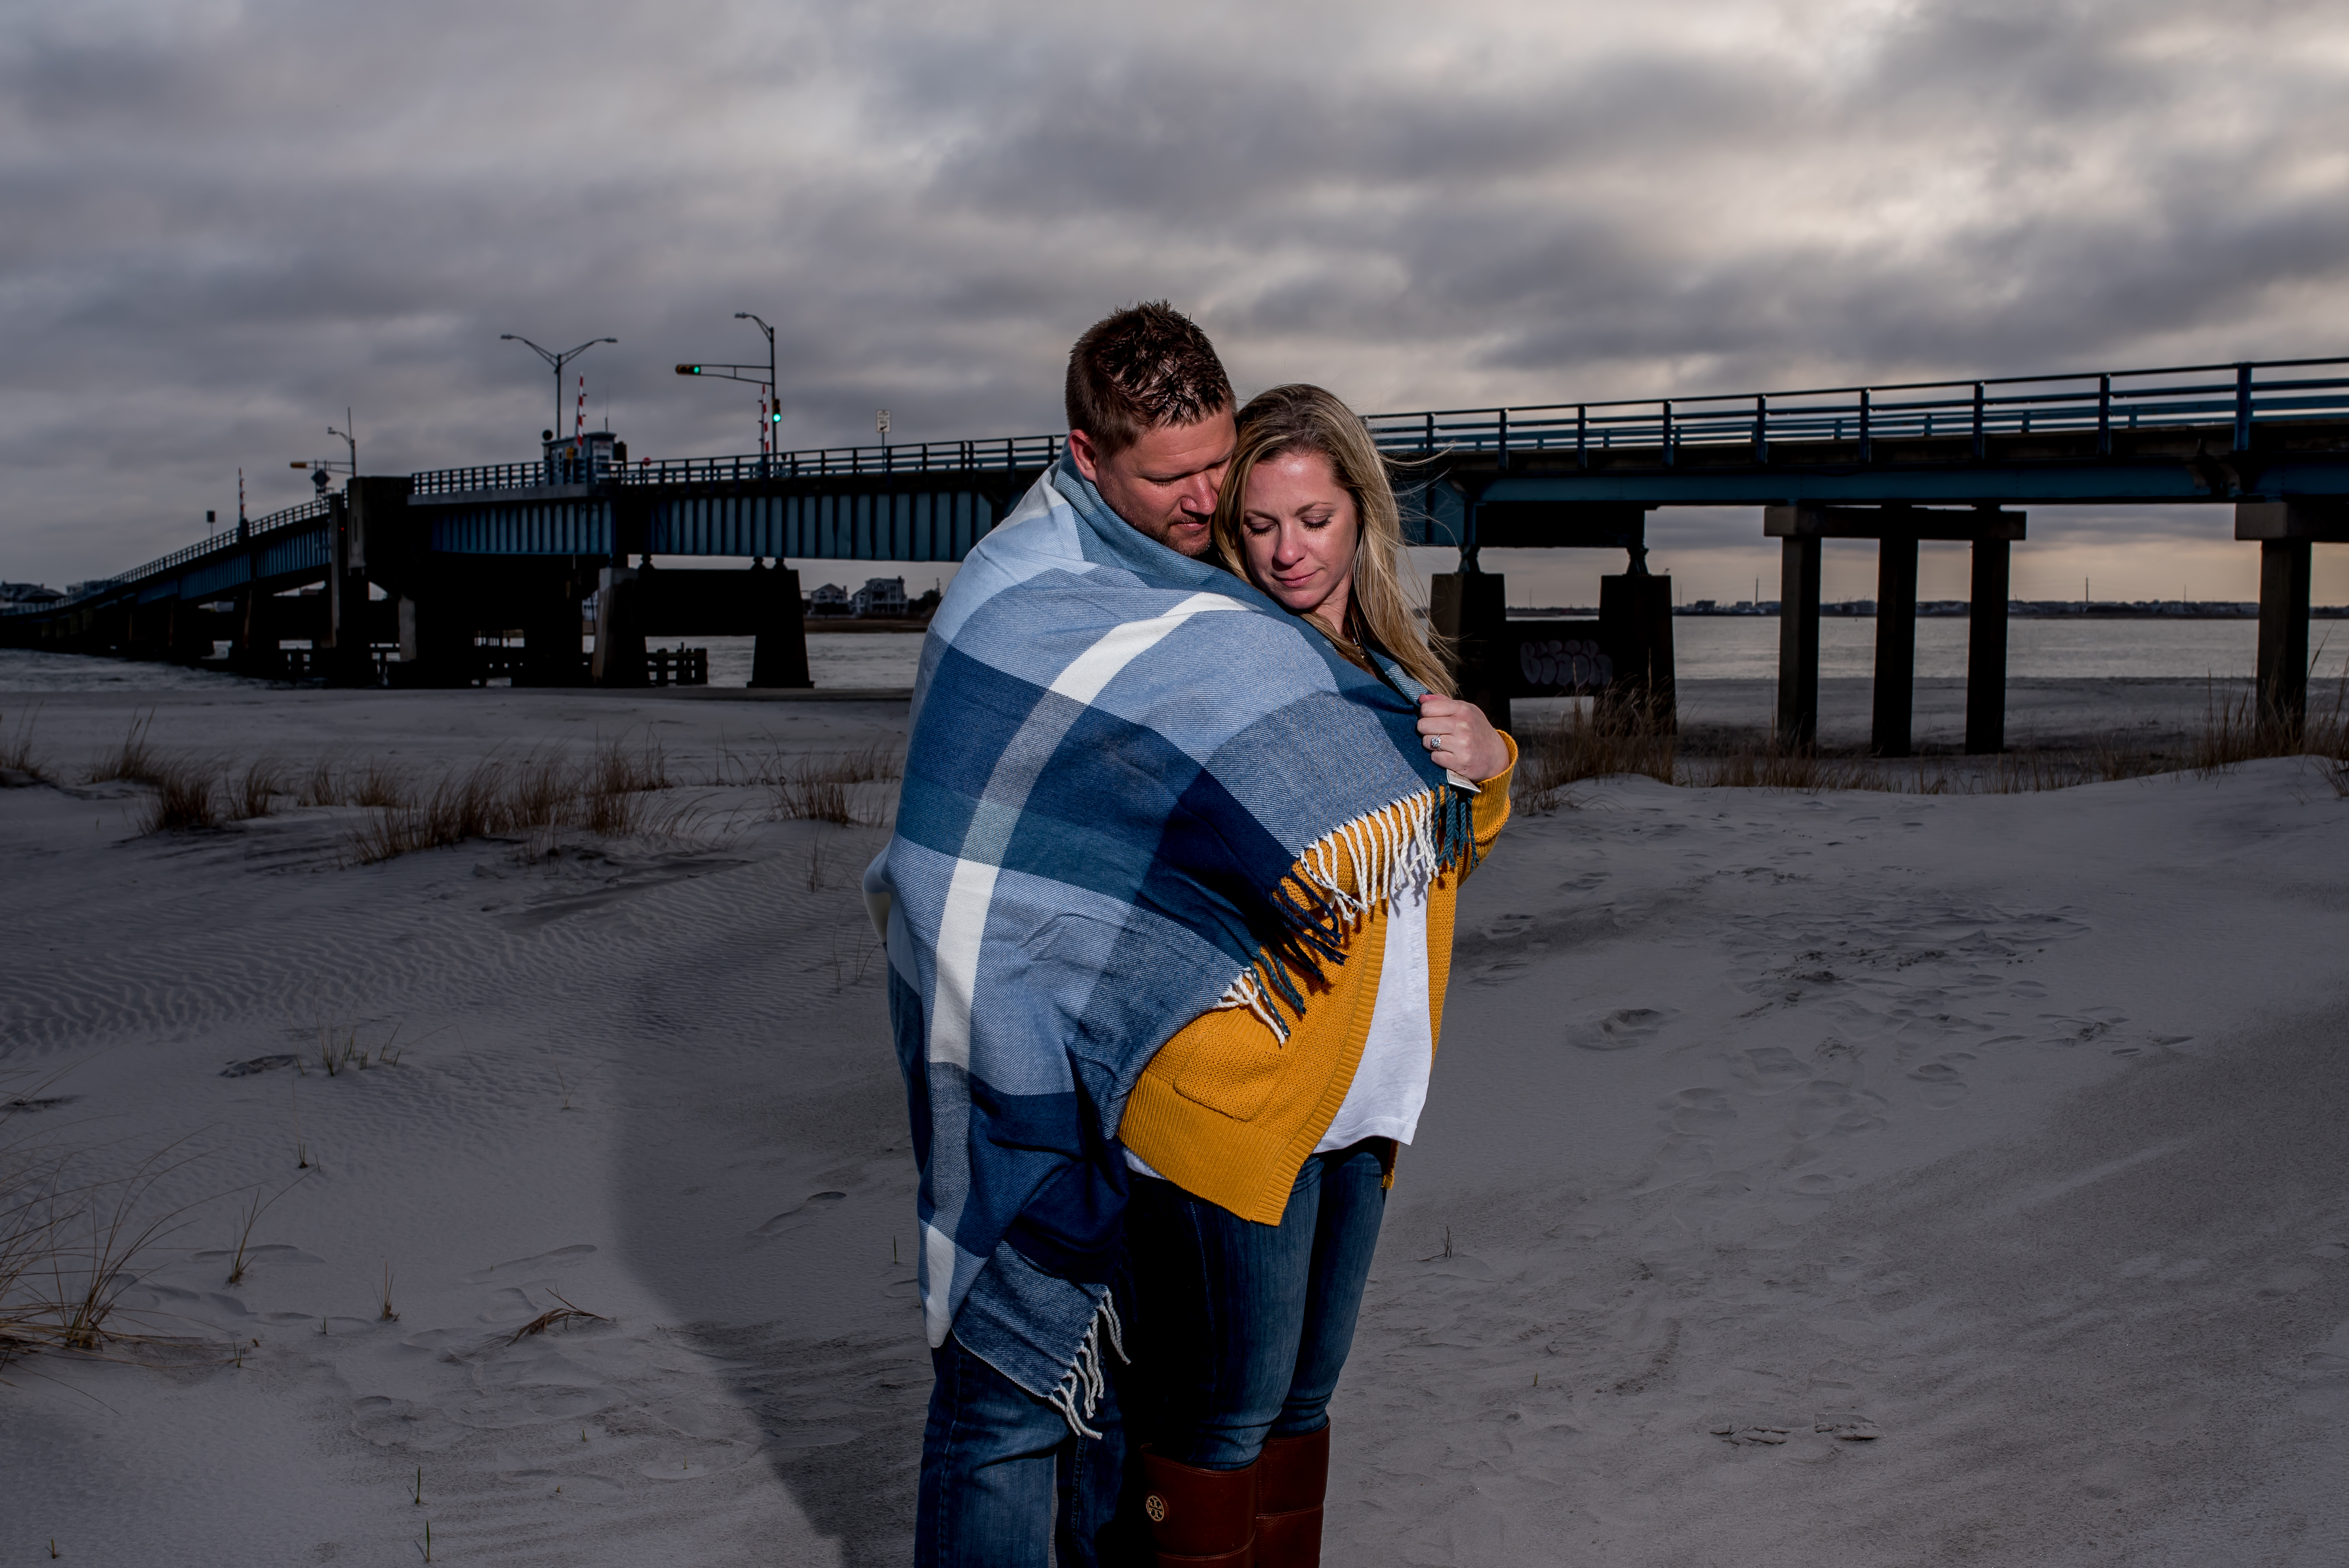 Silver Orchid Photography, Silver Orchid Portrait Photography, Portrait Photography, Engagement Photography, Beach Photography, Sea Isle City, NJ